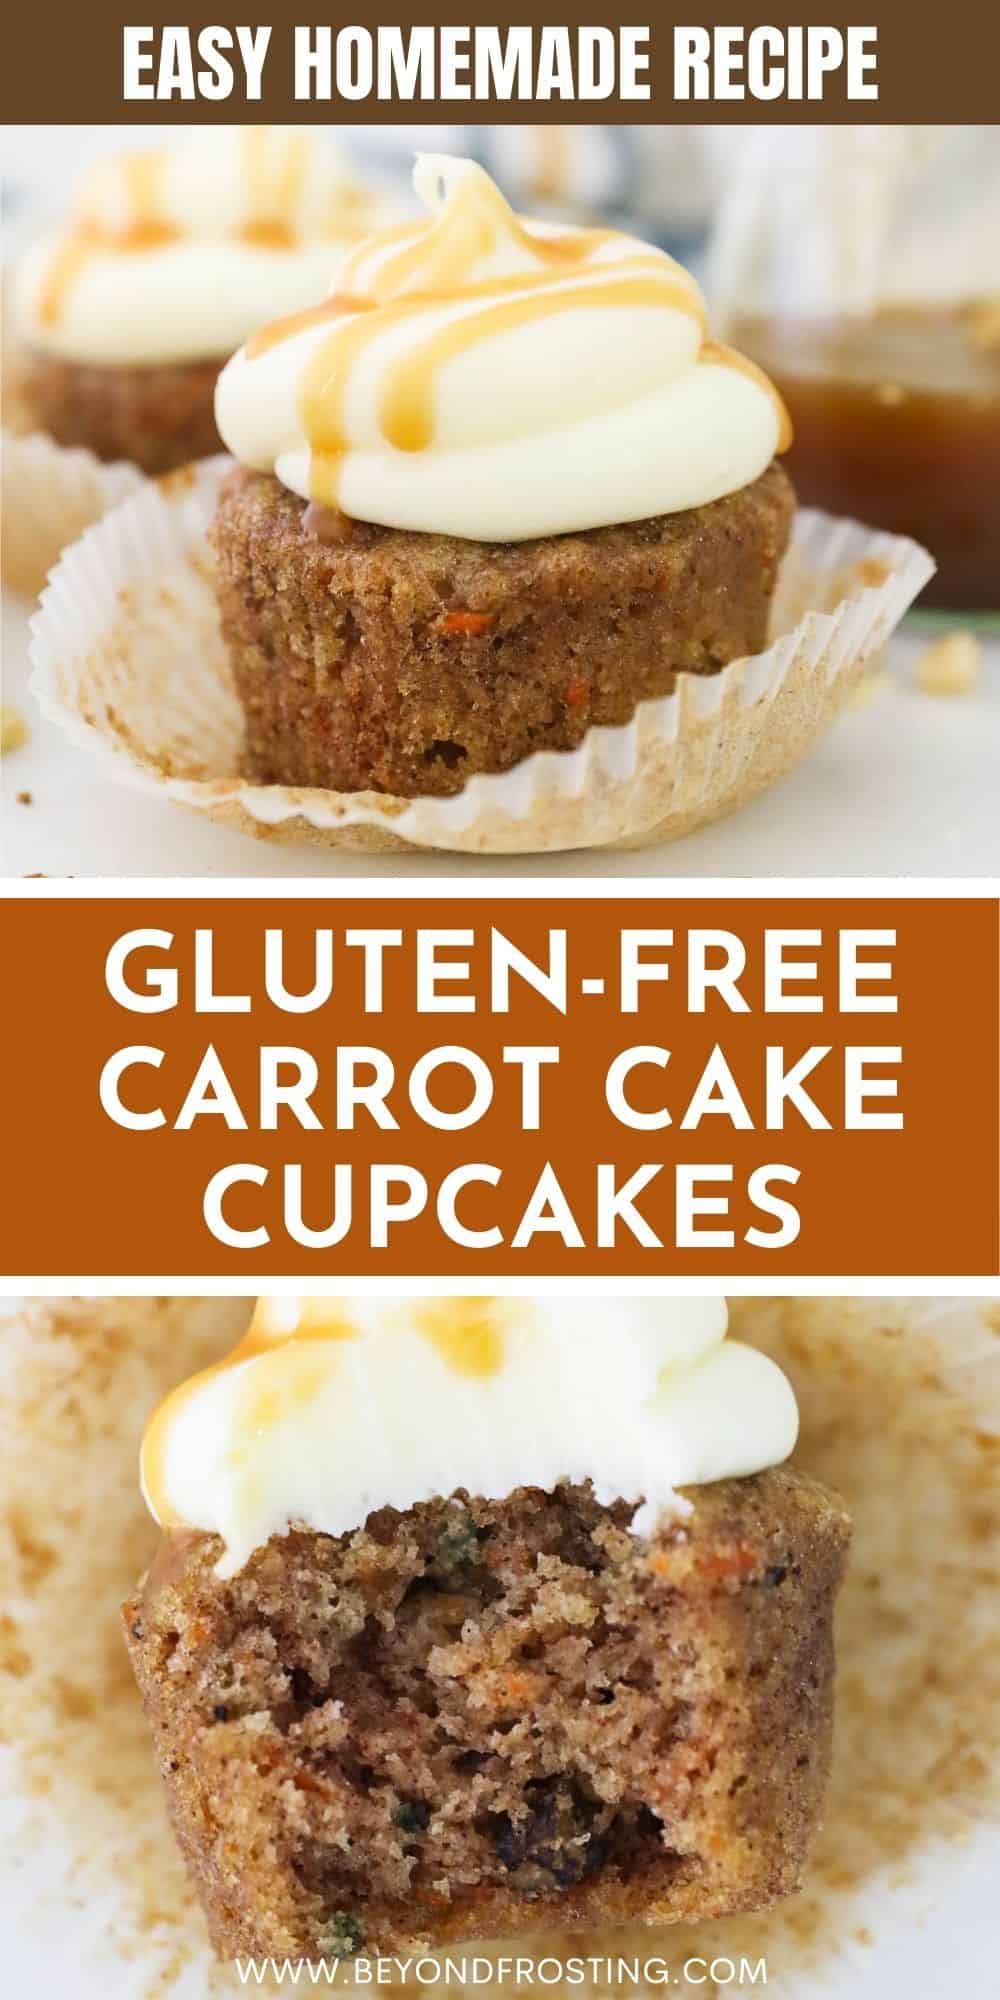 Easy Gluten-Free Carrot Cake Cupcakes l Beyond Frosting